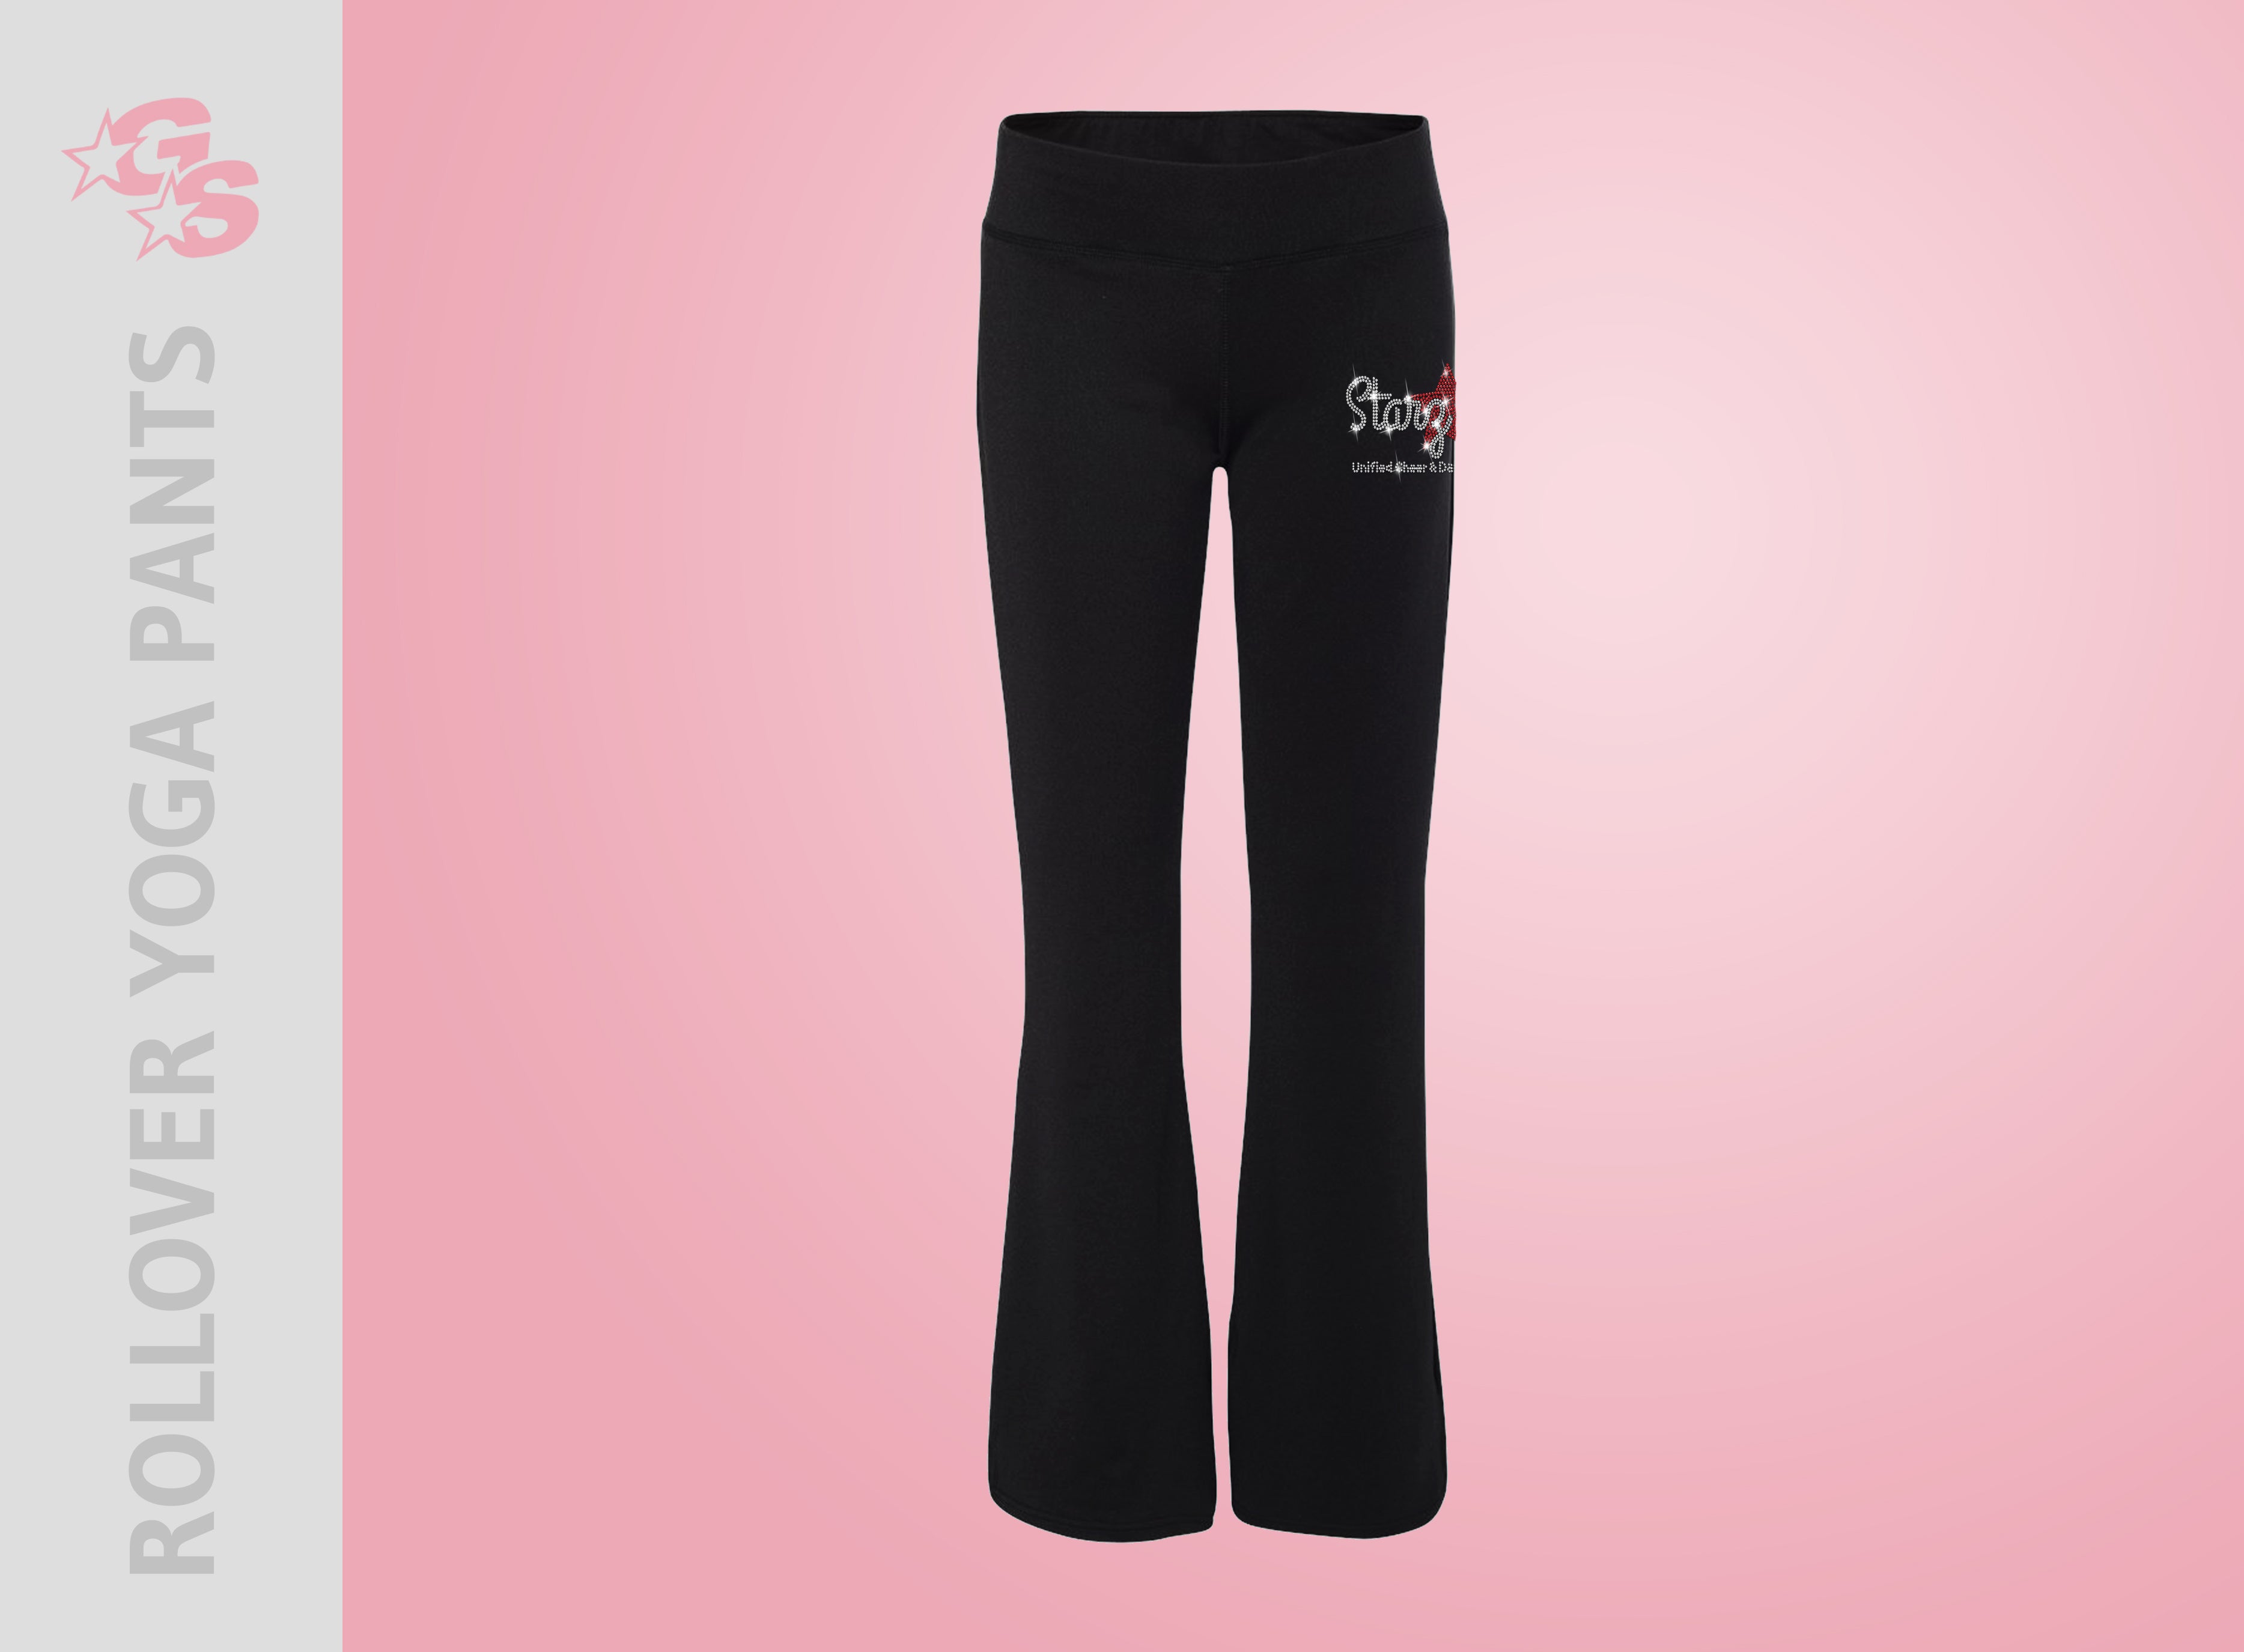 Special Olympic Starz Unified Cheer and Dance Rollover Yoga Pants